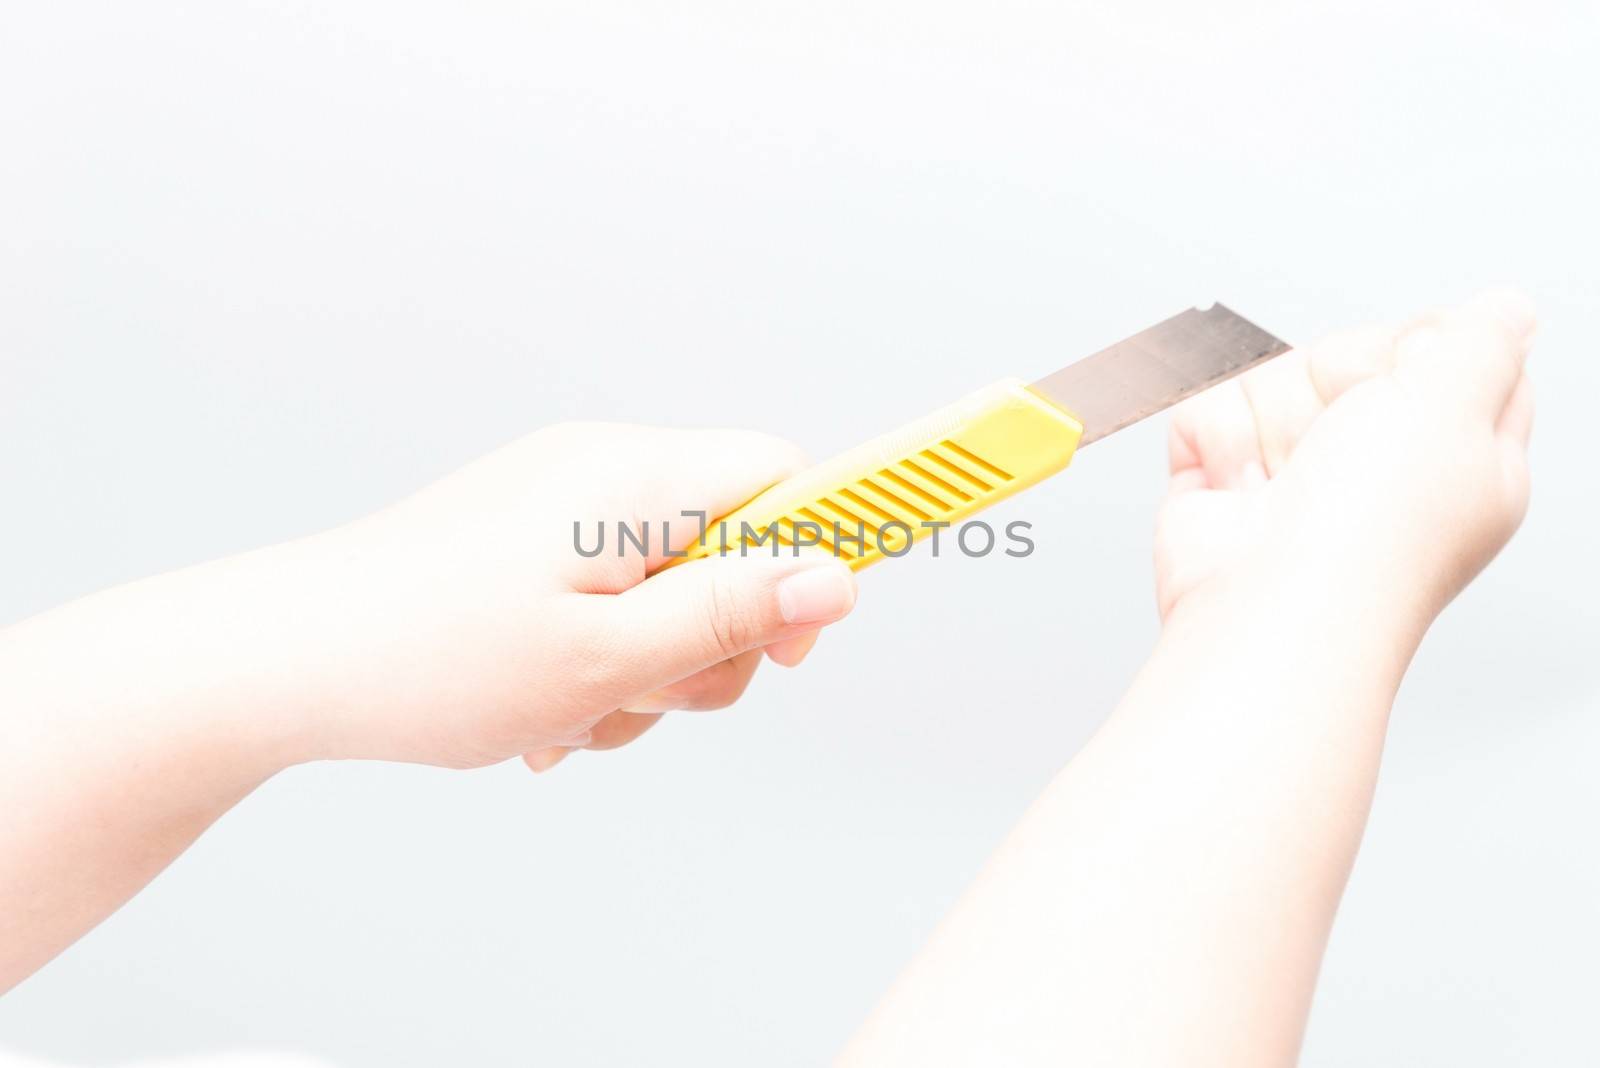 Asian woman holding a yellow box cutter knife trying to kill herself, isolated